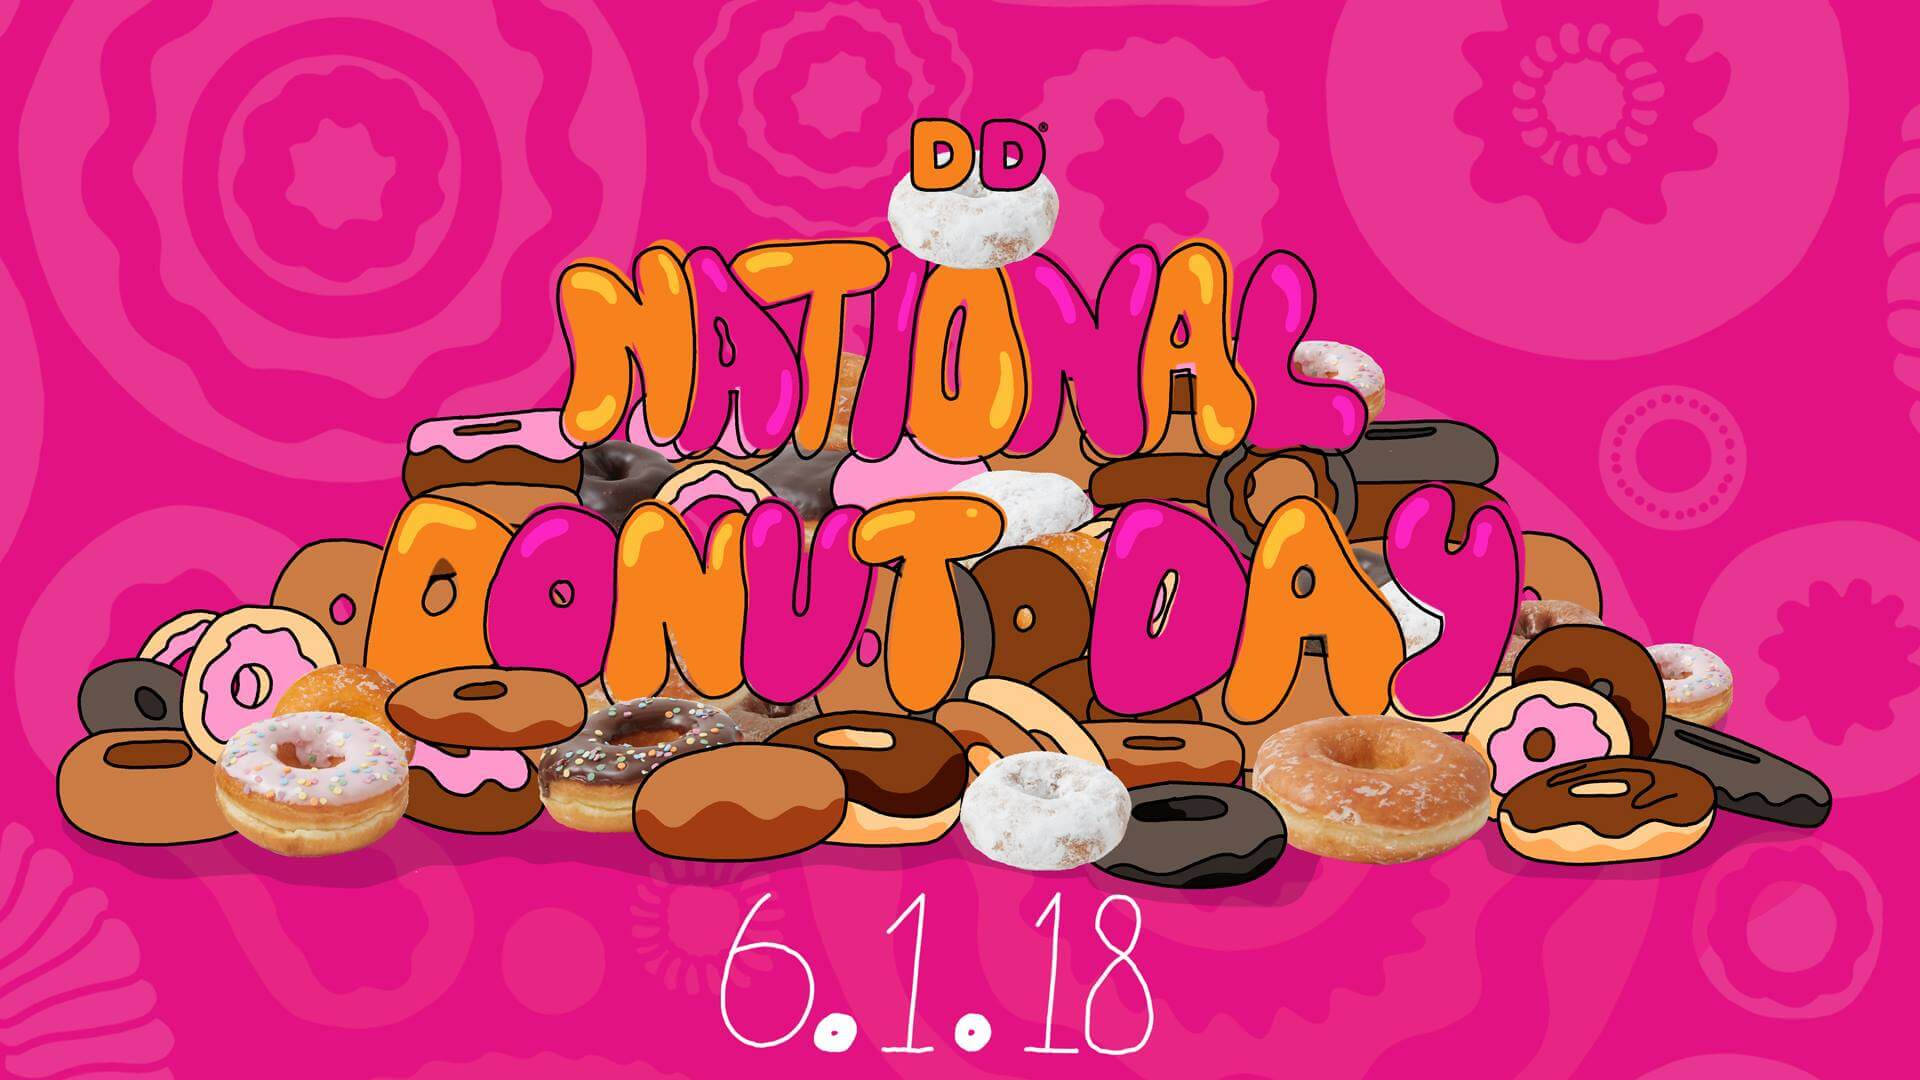 Dunkin Donuts National Donut Day 2018 Wallpaper